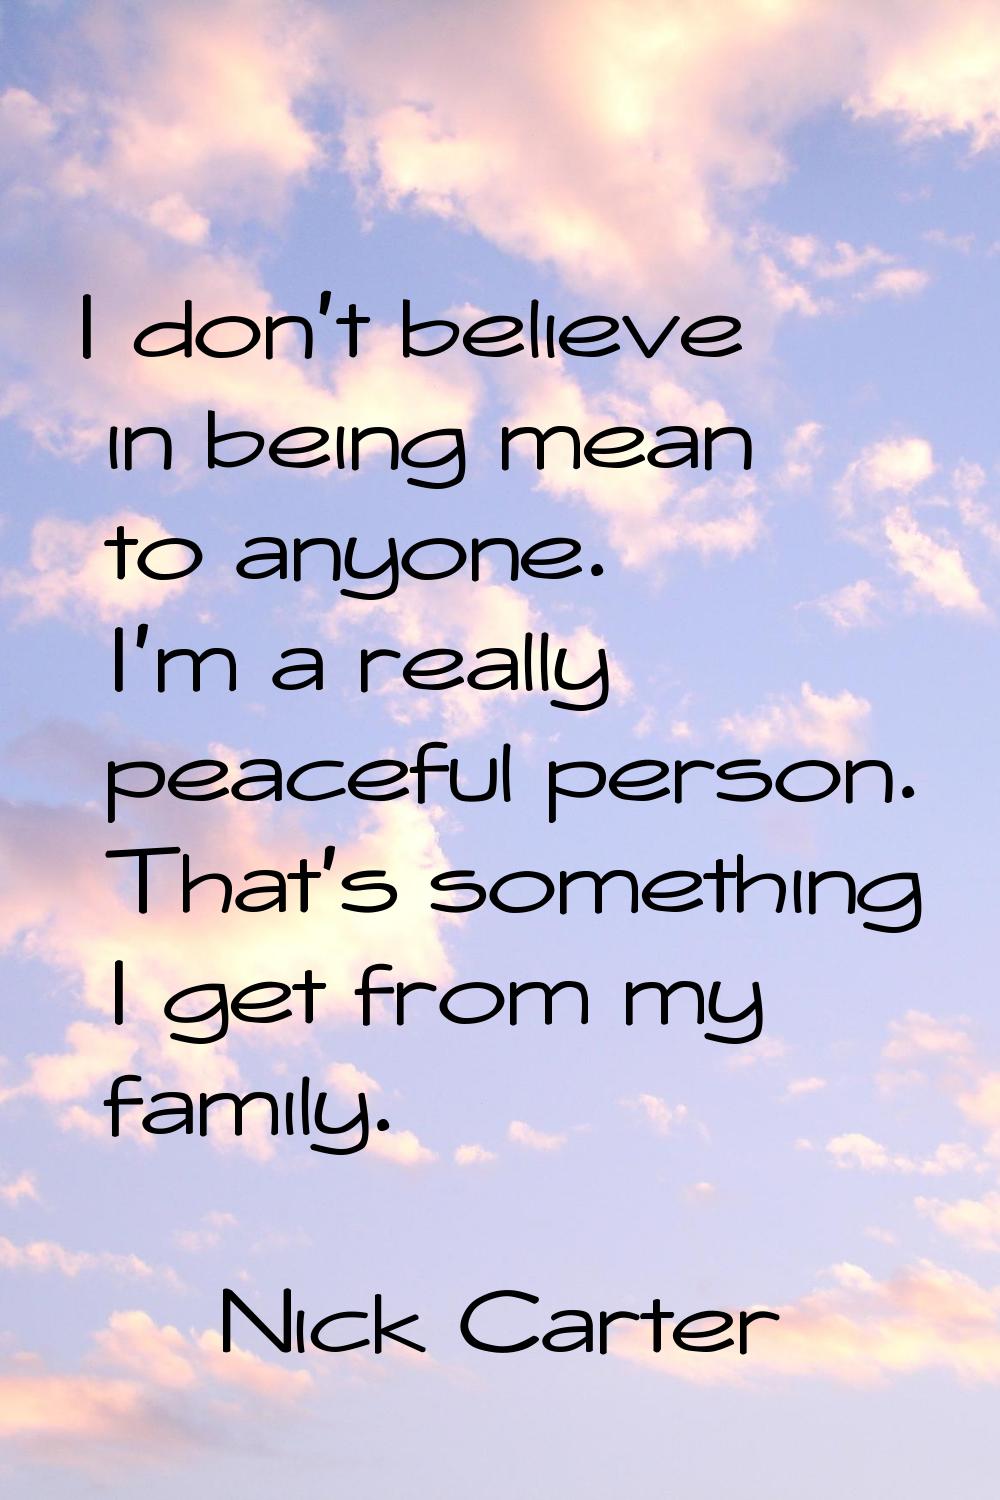 I don't believe in being mean to anyone. I'm a really peaceful person. That's something I get from 